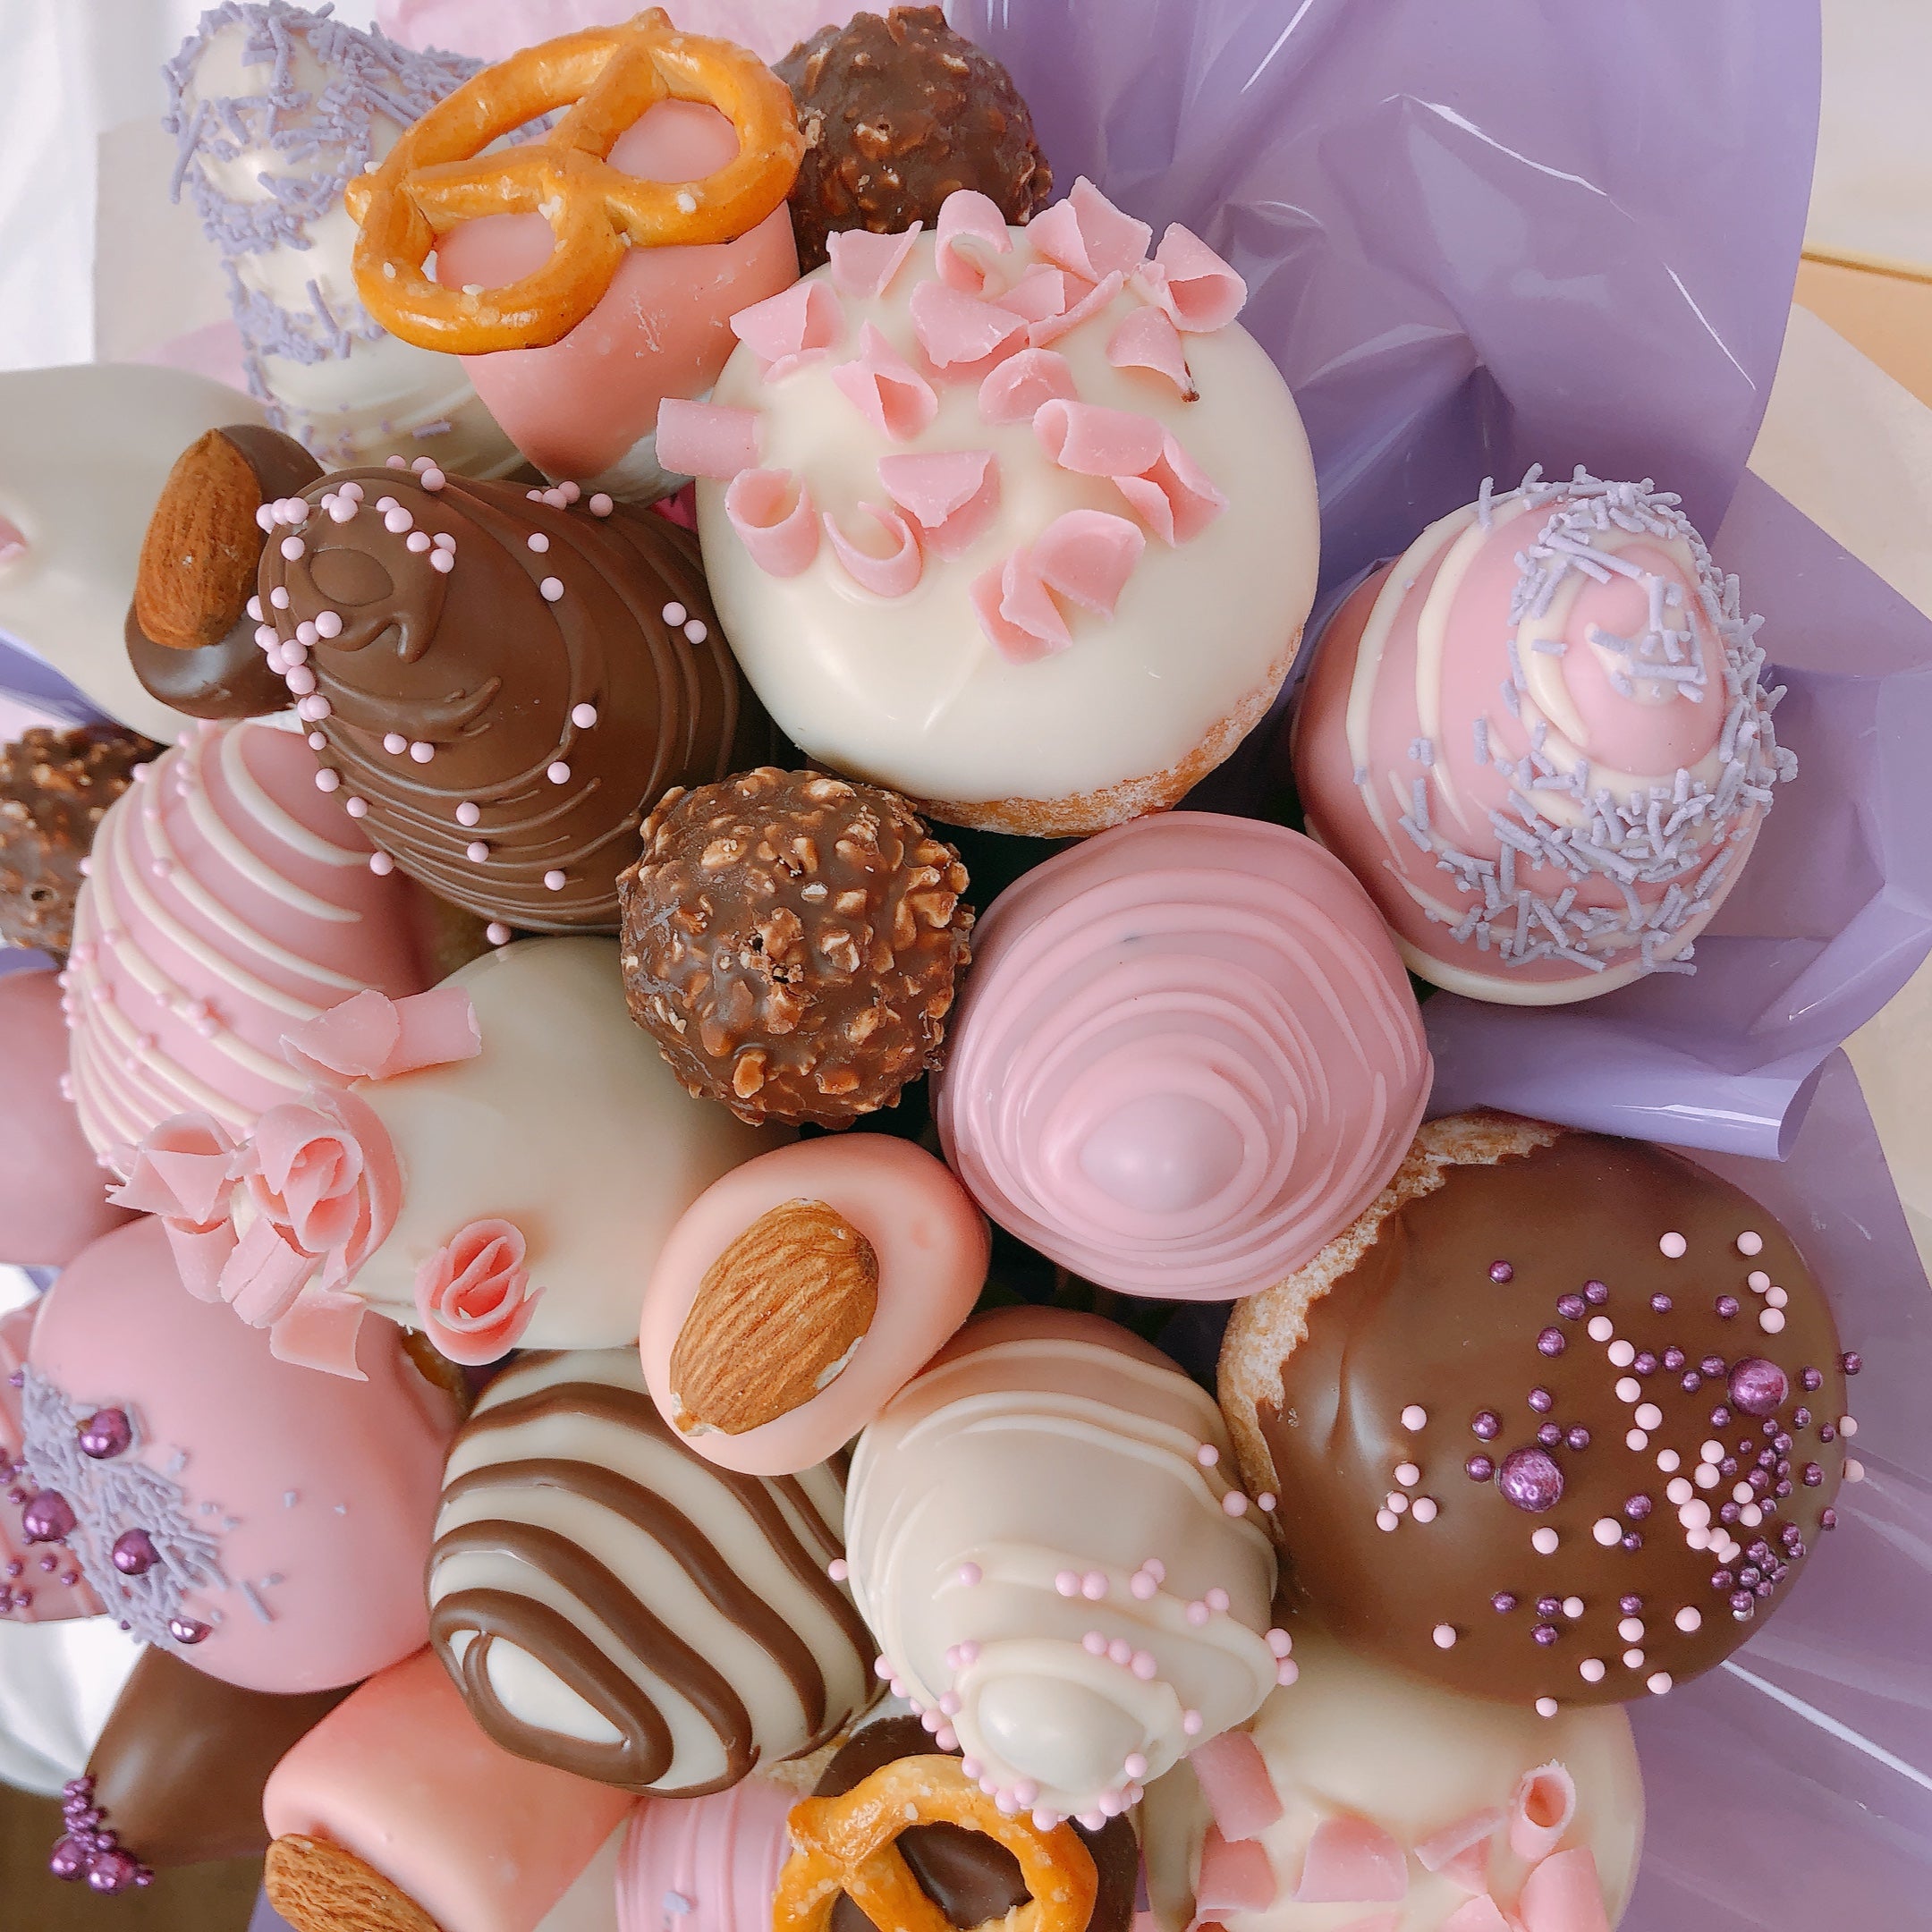 Chocolate Strawberry & Donut Bouquet chocolate Bouquet delivery online same-day service